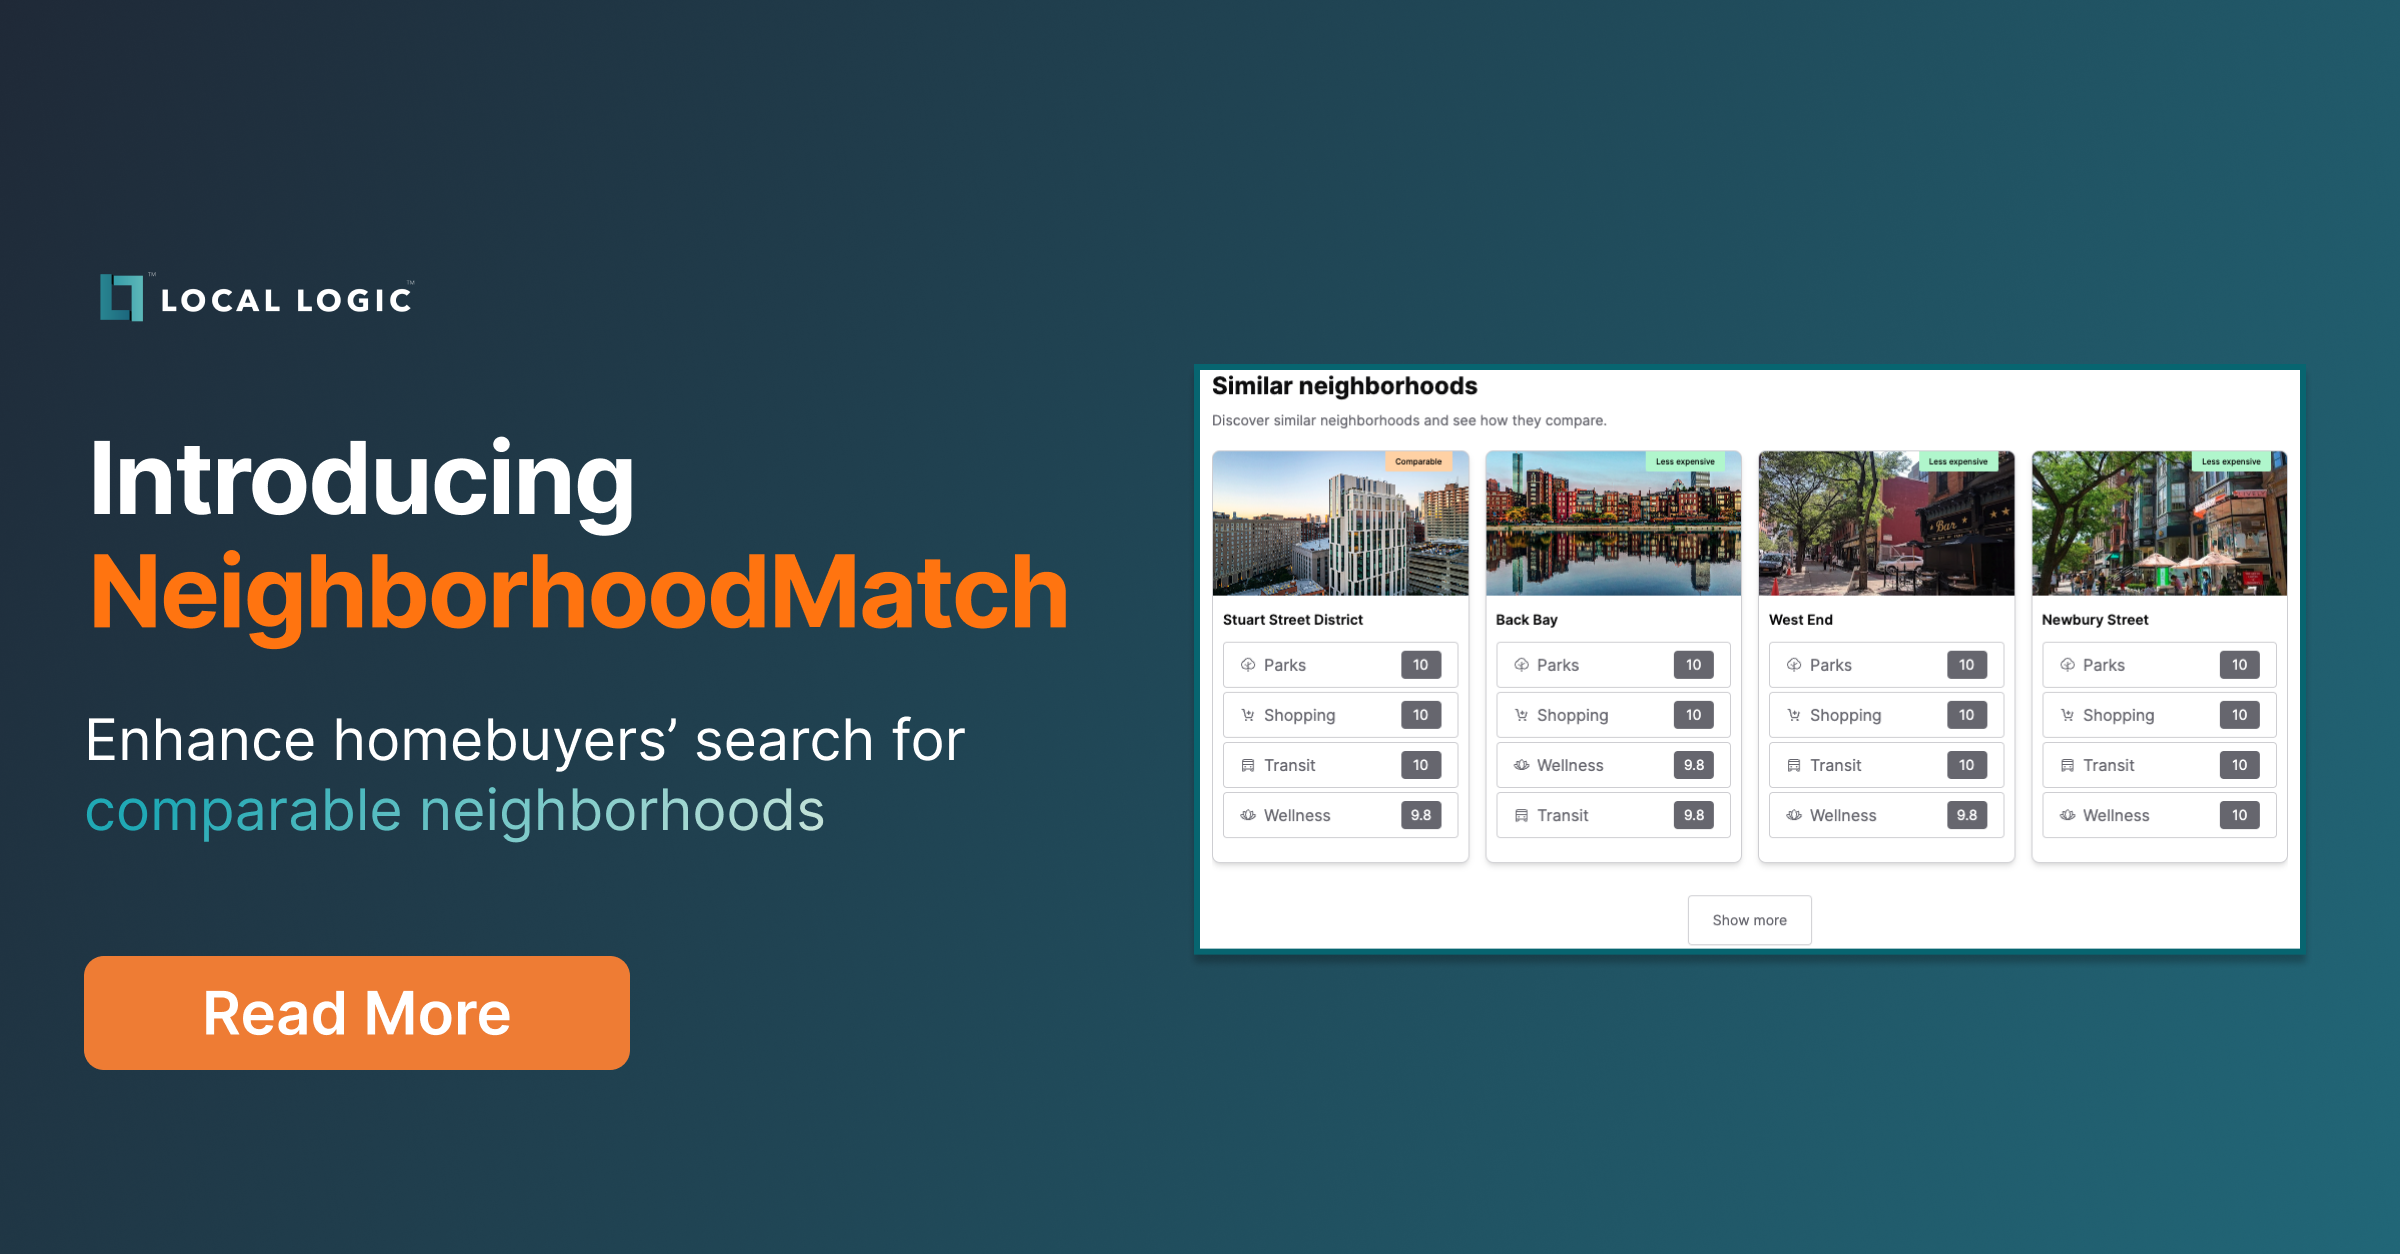 Local Logic logo on top of text "Introducing NeighborhoodMatch - Enhance homebuyers' search for comparable neighborhoods" Next to it is screenshot of NeighborhoodMatch a location intelligence solutions by Local Logic that provides insights and data on similar neighborhoods